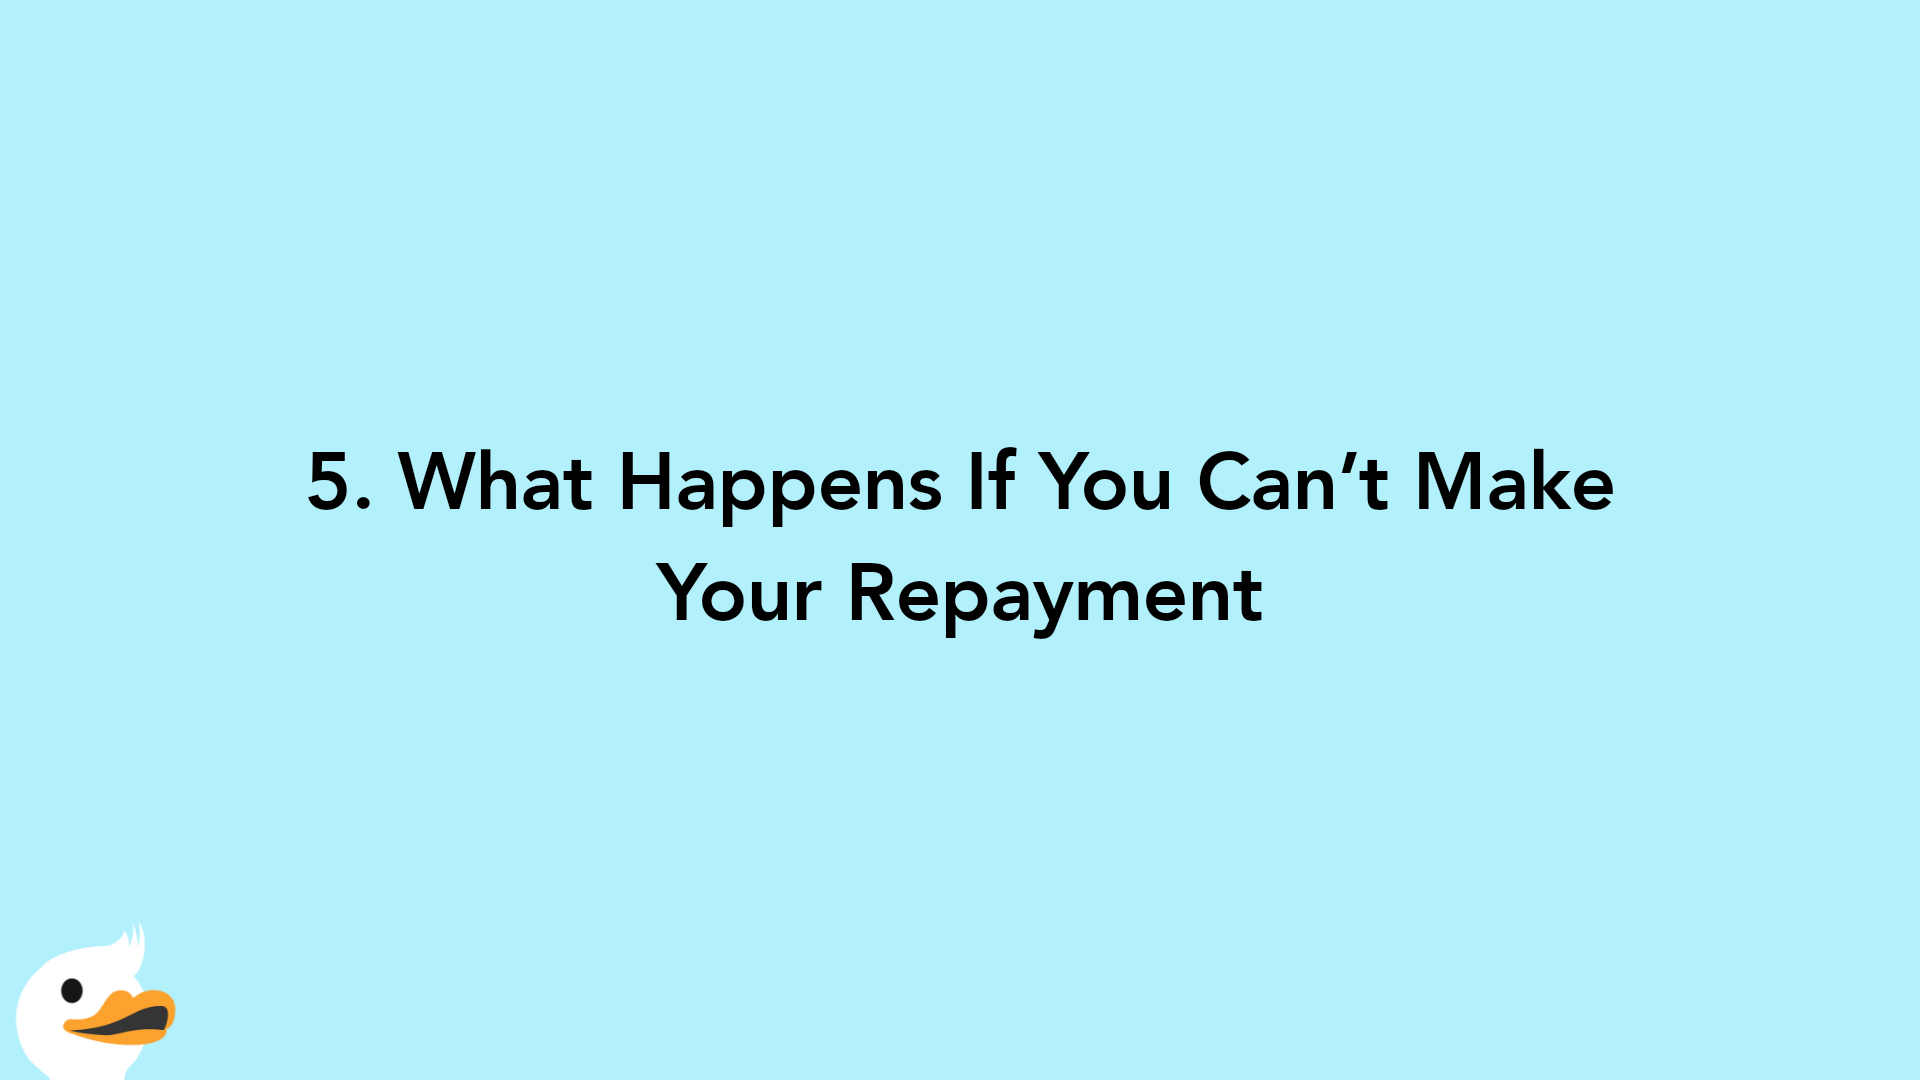 5. What Happens If You Can’t Make Your Repayment